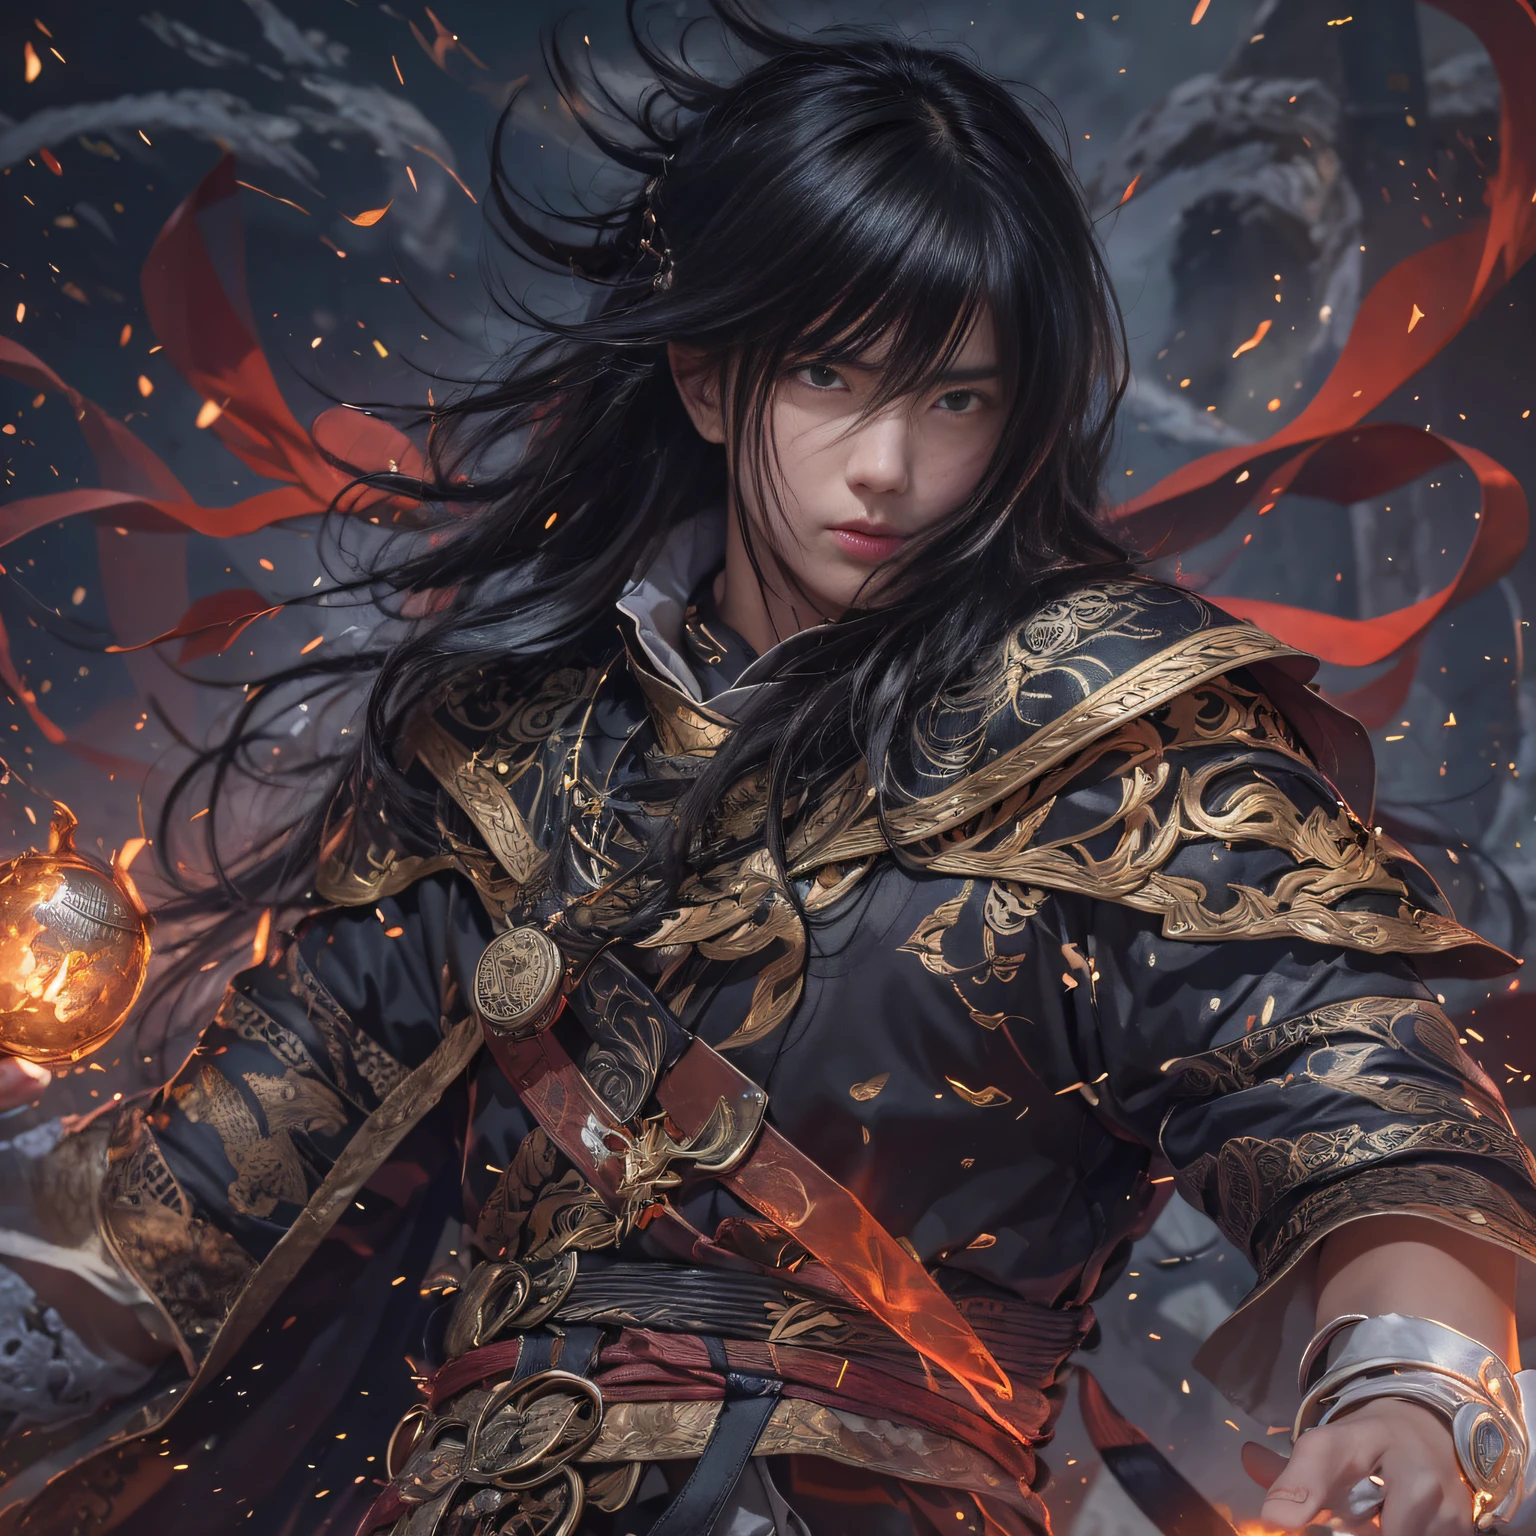 （ruins）eyes filled with angry，He clenched his fists，Rush up，Deliver a fatal blow to your opponent，full bodyesbian，Full Body Male Mage 32K（tmasterpiece，k hd，hyper HD，32K）Long flowing black hair，Campsite size，zydink， a color， patriot （ruins）， （Linen batik scarf）， Angry fighting stance， looking at the ground， Batik linen bandana， Chinese python pattern long-sleeved garment， （Abstract propylene splash：1.2）， Dark clouds lightning background，Flour flies（realisticlying：1.4），Black color hair，Flour fluttering，Background fog， A high resolution， the detail， RAW photogr， Sharp Re， Nikon D850 Film Stock Photo by Jefferies Lee 4 Kodak Portra 400 Camera F1.6 shots, Rich colors, ultra-realistic vivid textures, Dramatic lighting, Unreal Engine Art Station Trend, cinestir 800，Flowing black hair,（（（Male mage））），The male mage was furious，